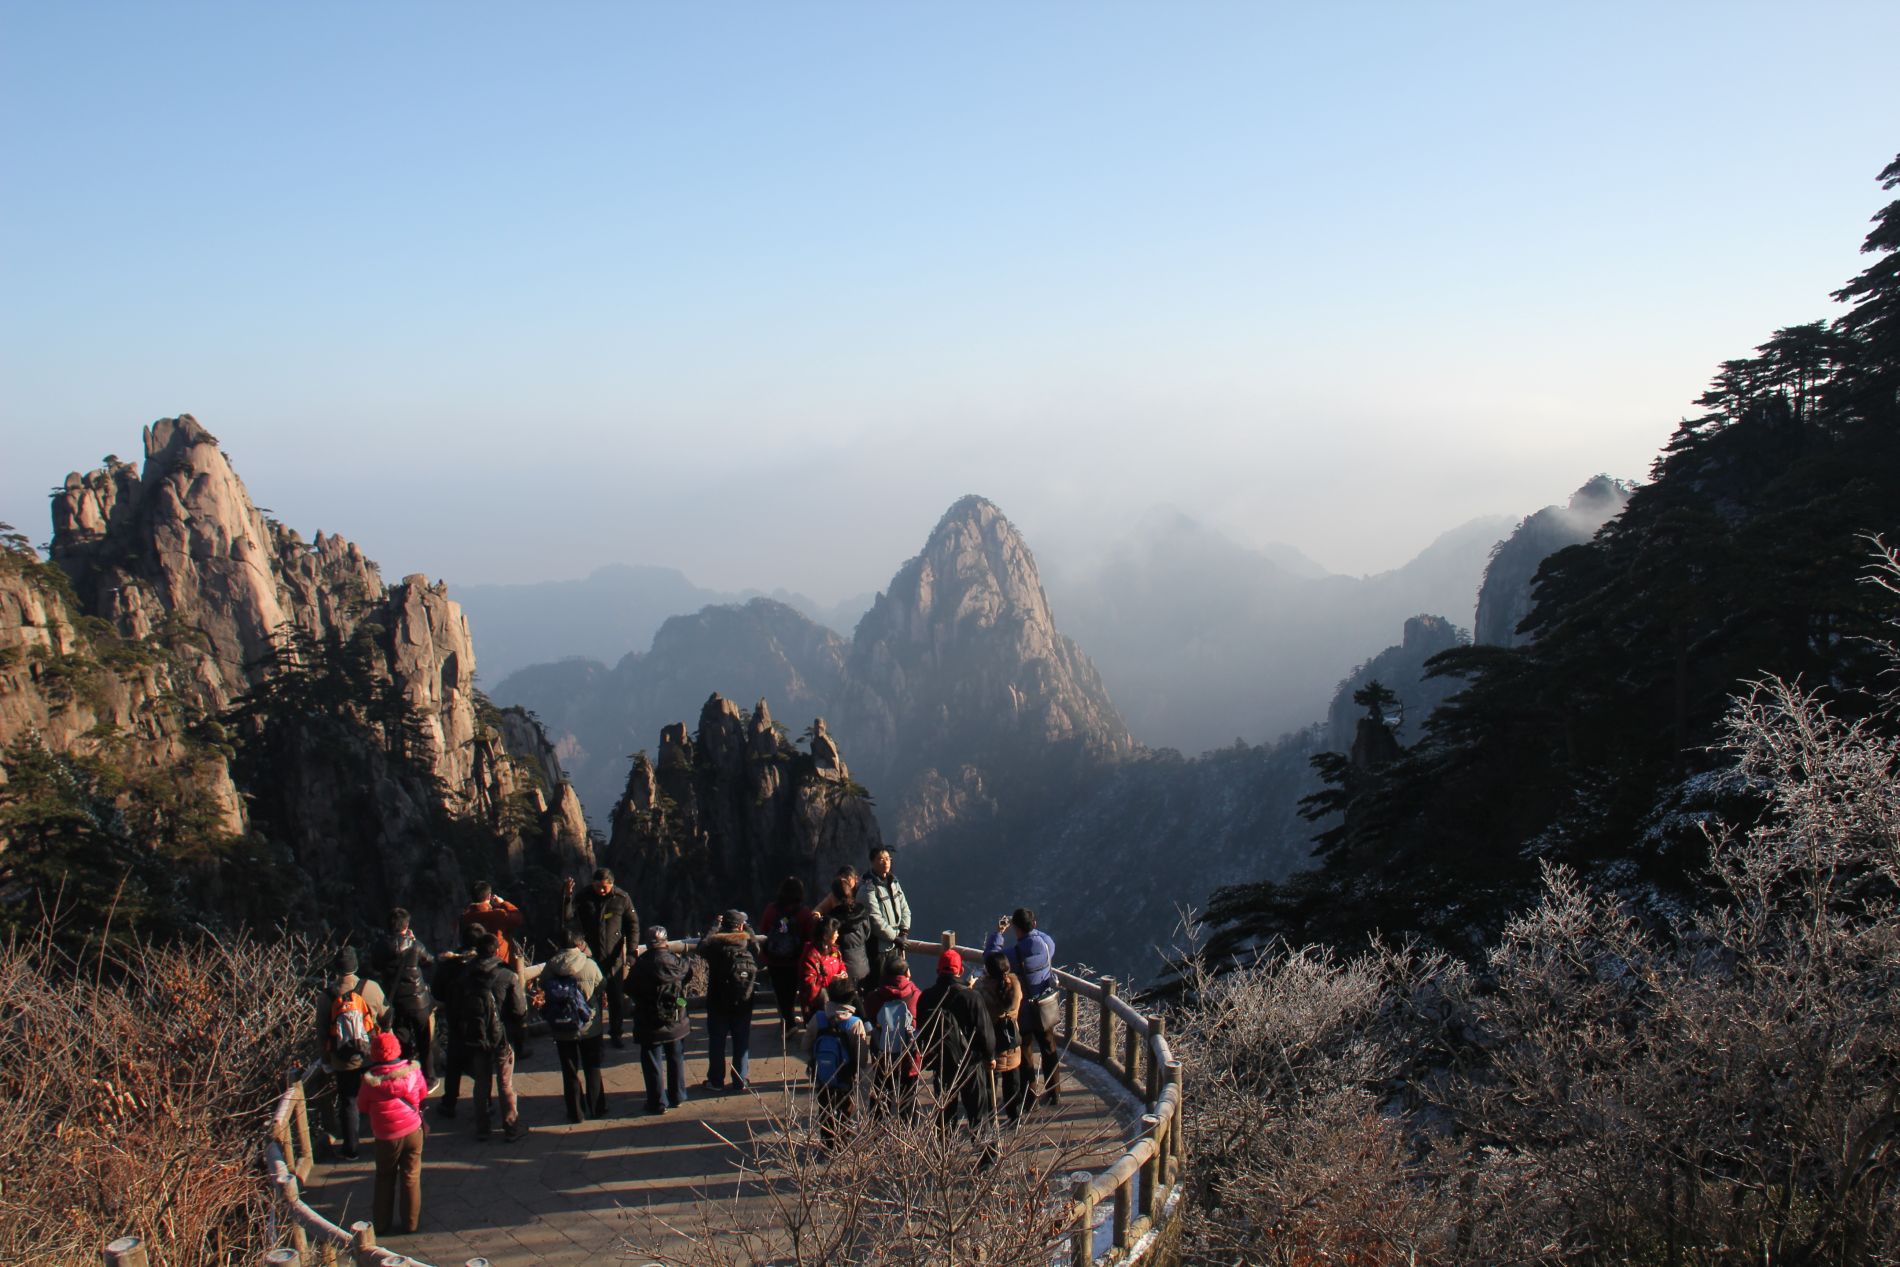 Chinese tourists admire a view near the summit of Huangshan.